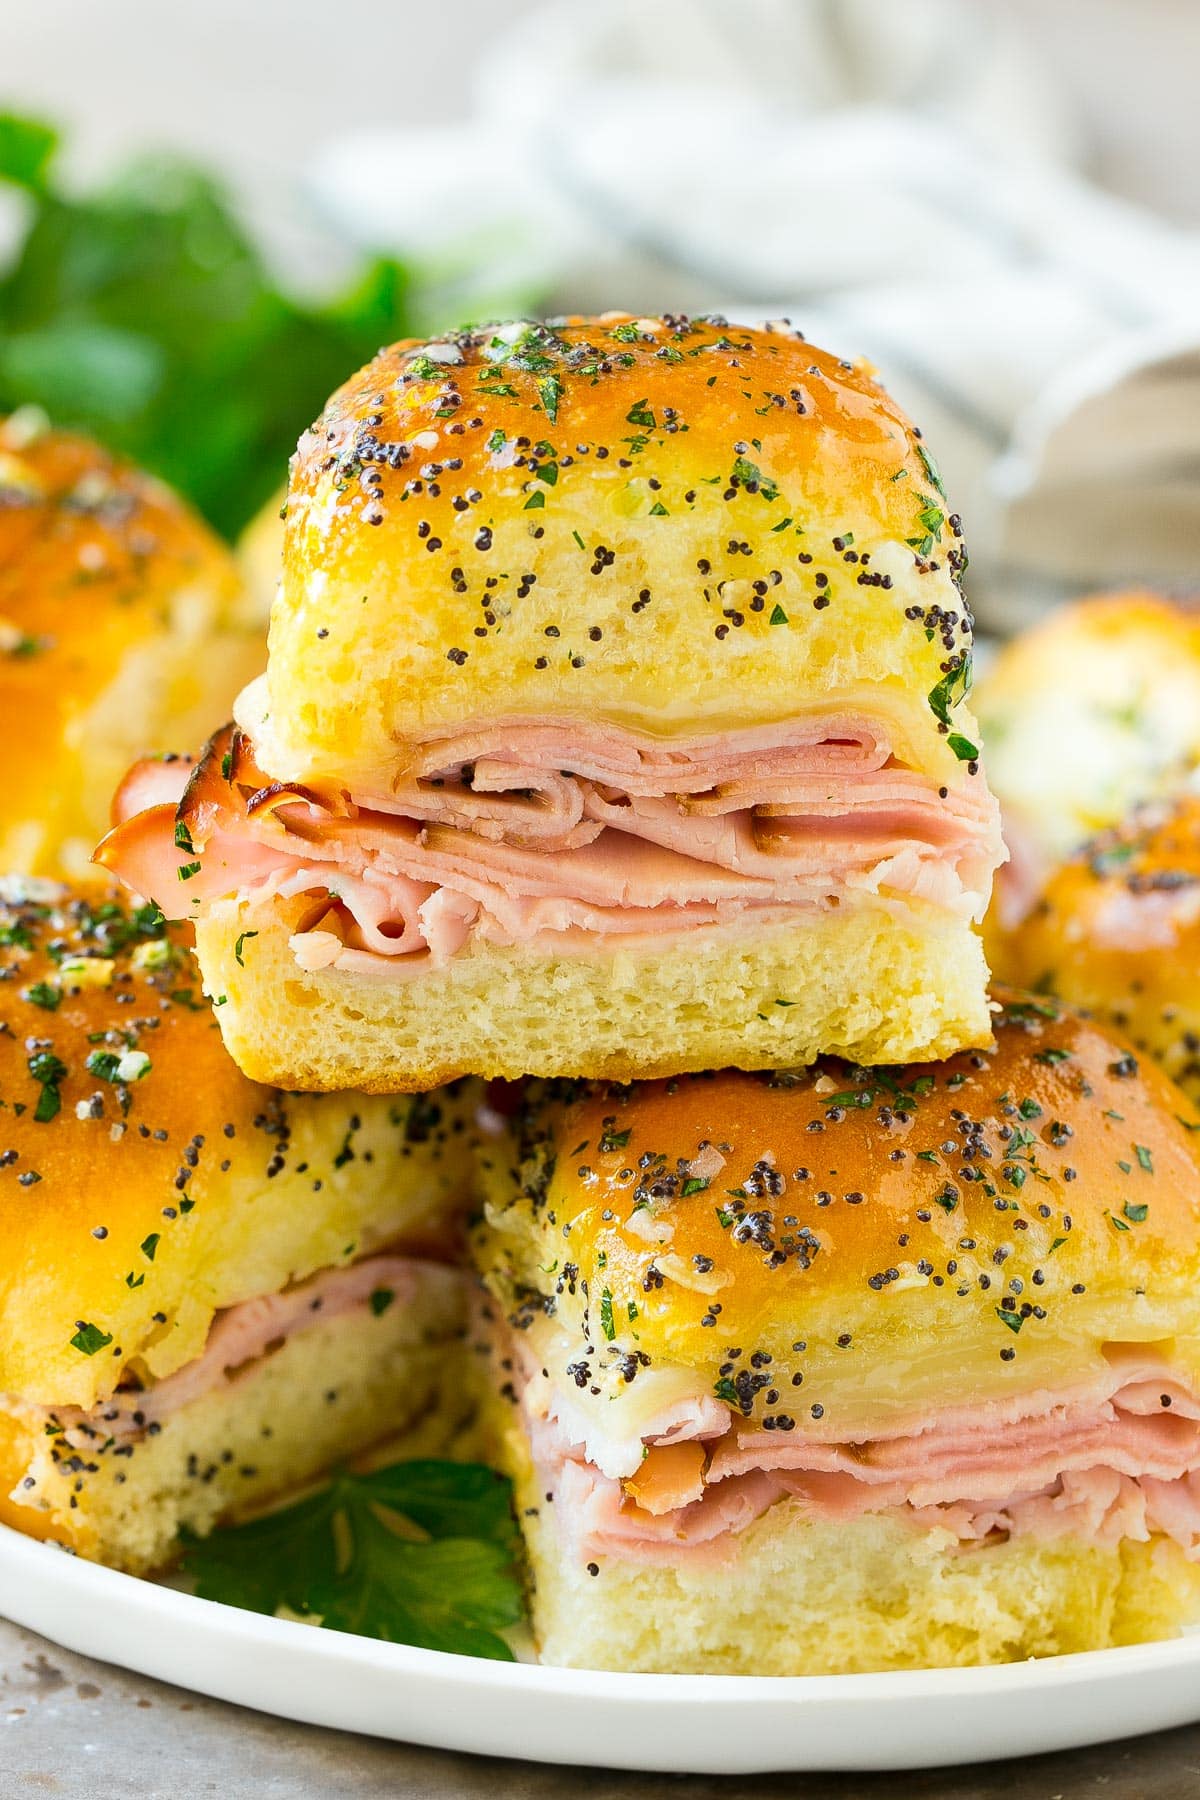 Ham and cheese sliders on a serving plate, garnished with parsley.